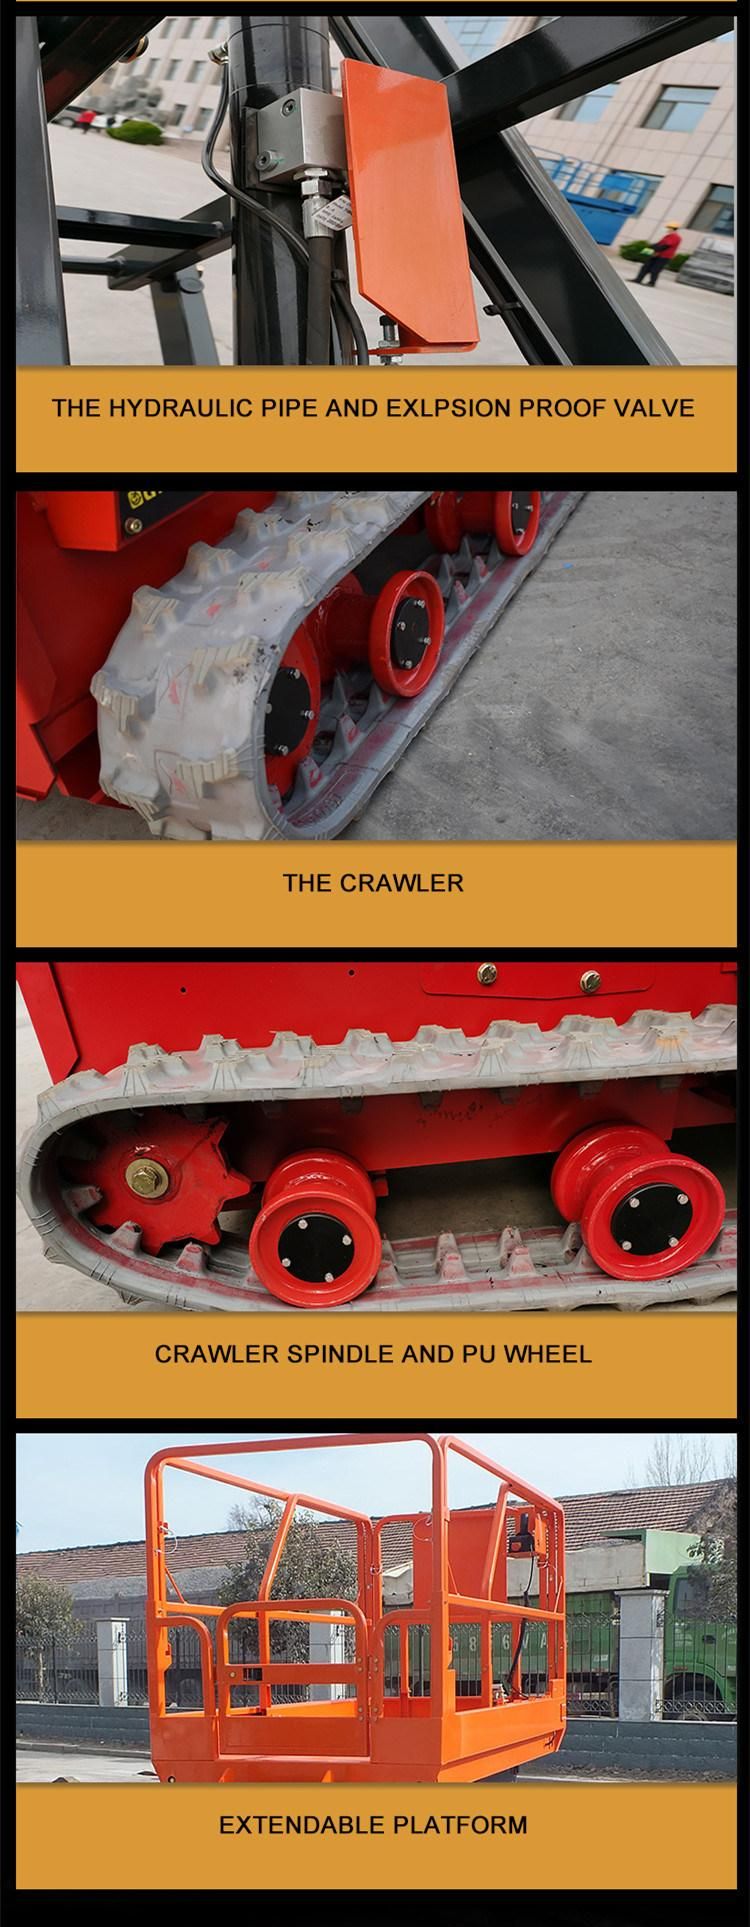 Platform Height Max 12 M Crawler Hydraulic Self Propelled Electric Driven Lifting Types Cylinders Lift